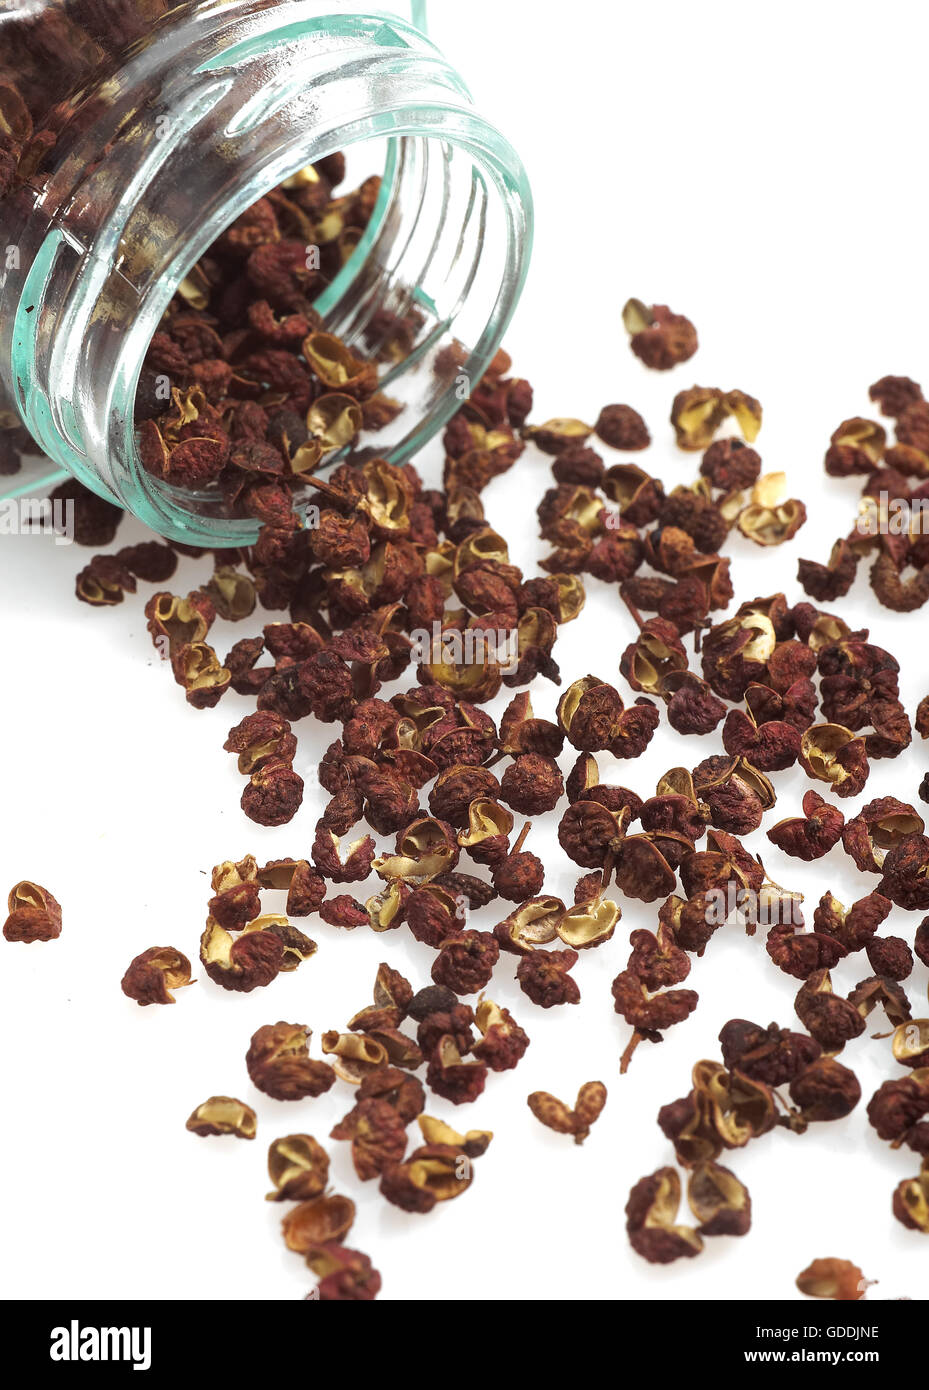 CZECHUAN OR SICHUAN PEPPER AGAINST WHITE BACKGROUND Stock Photo